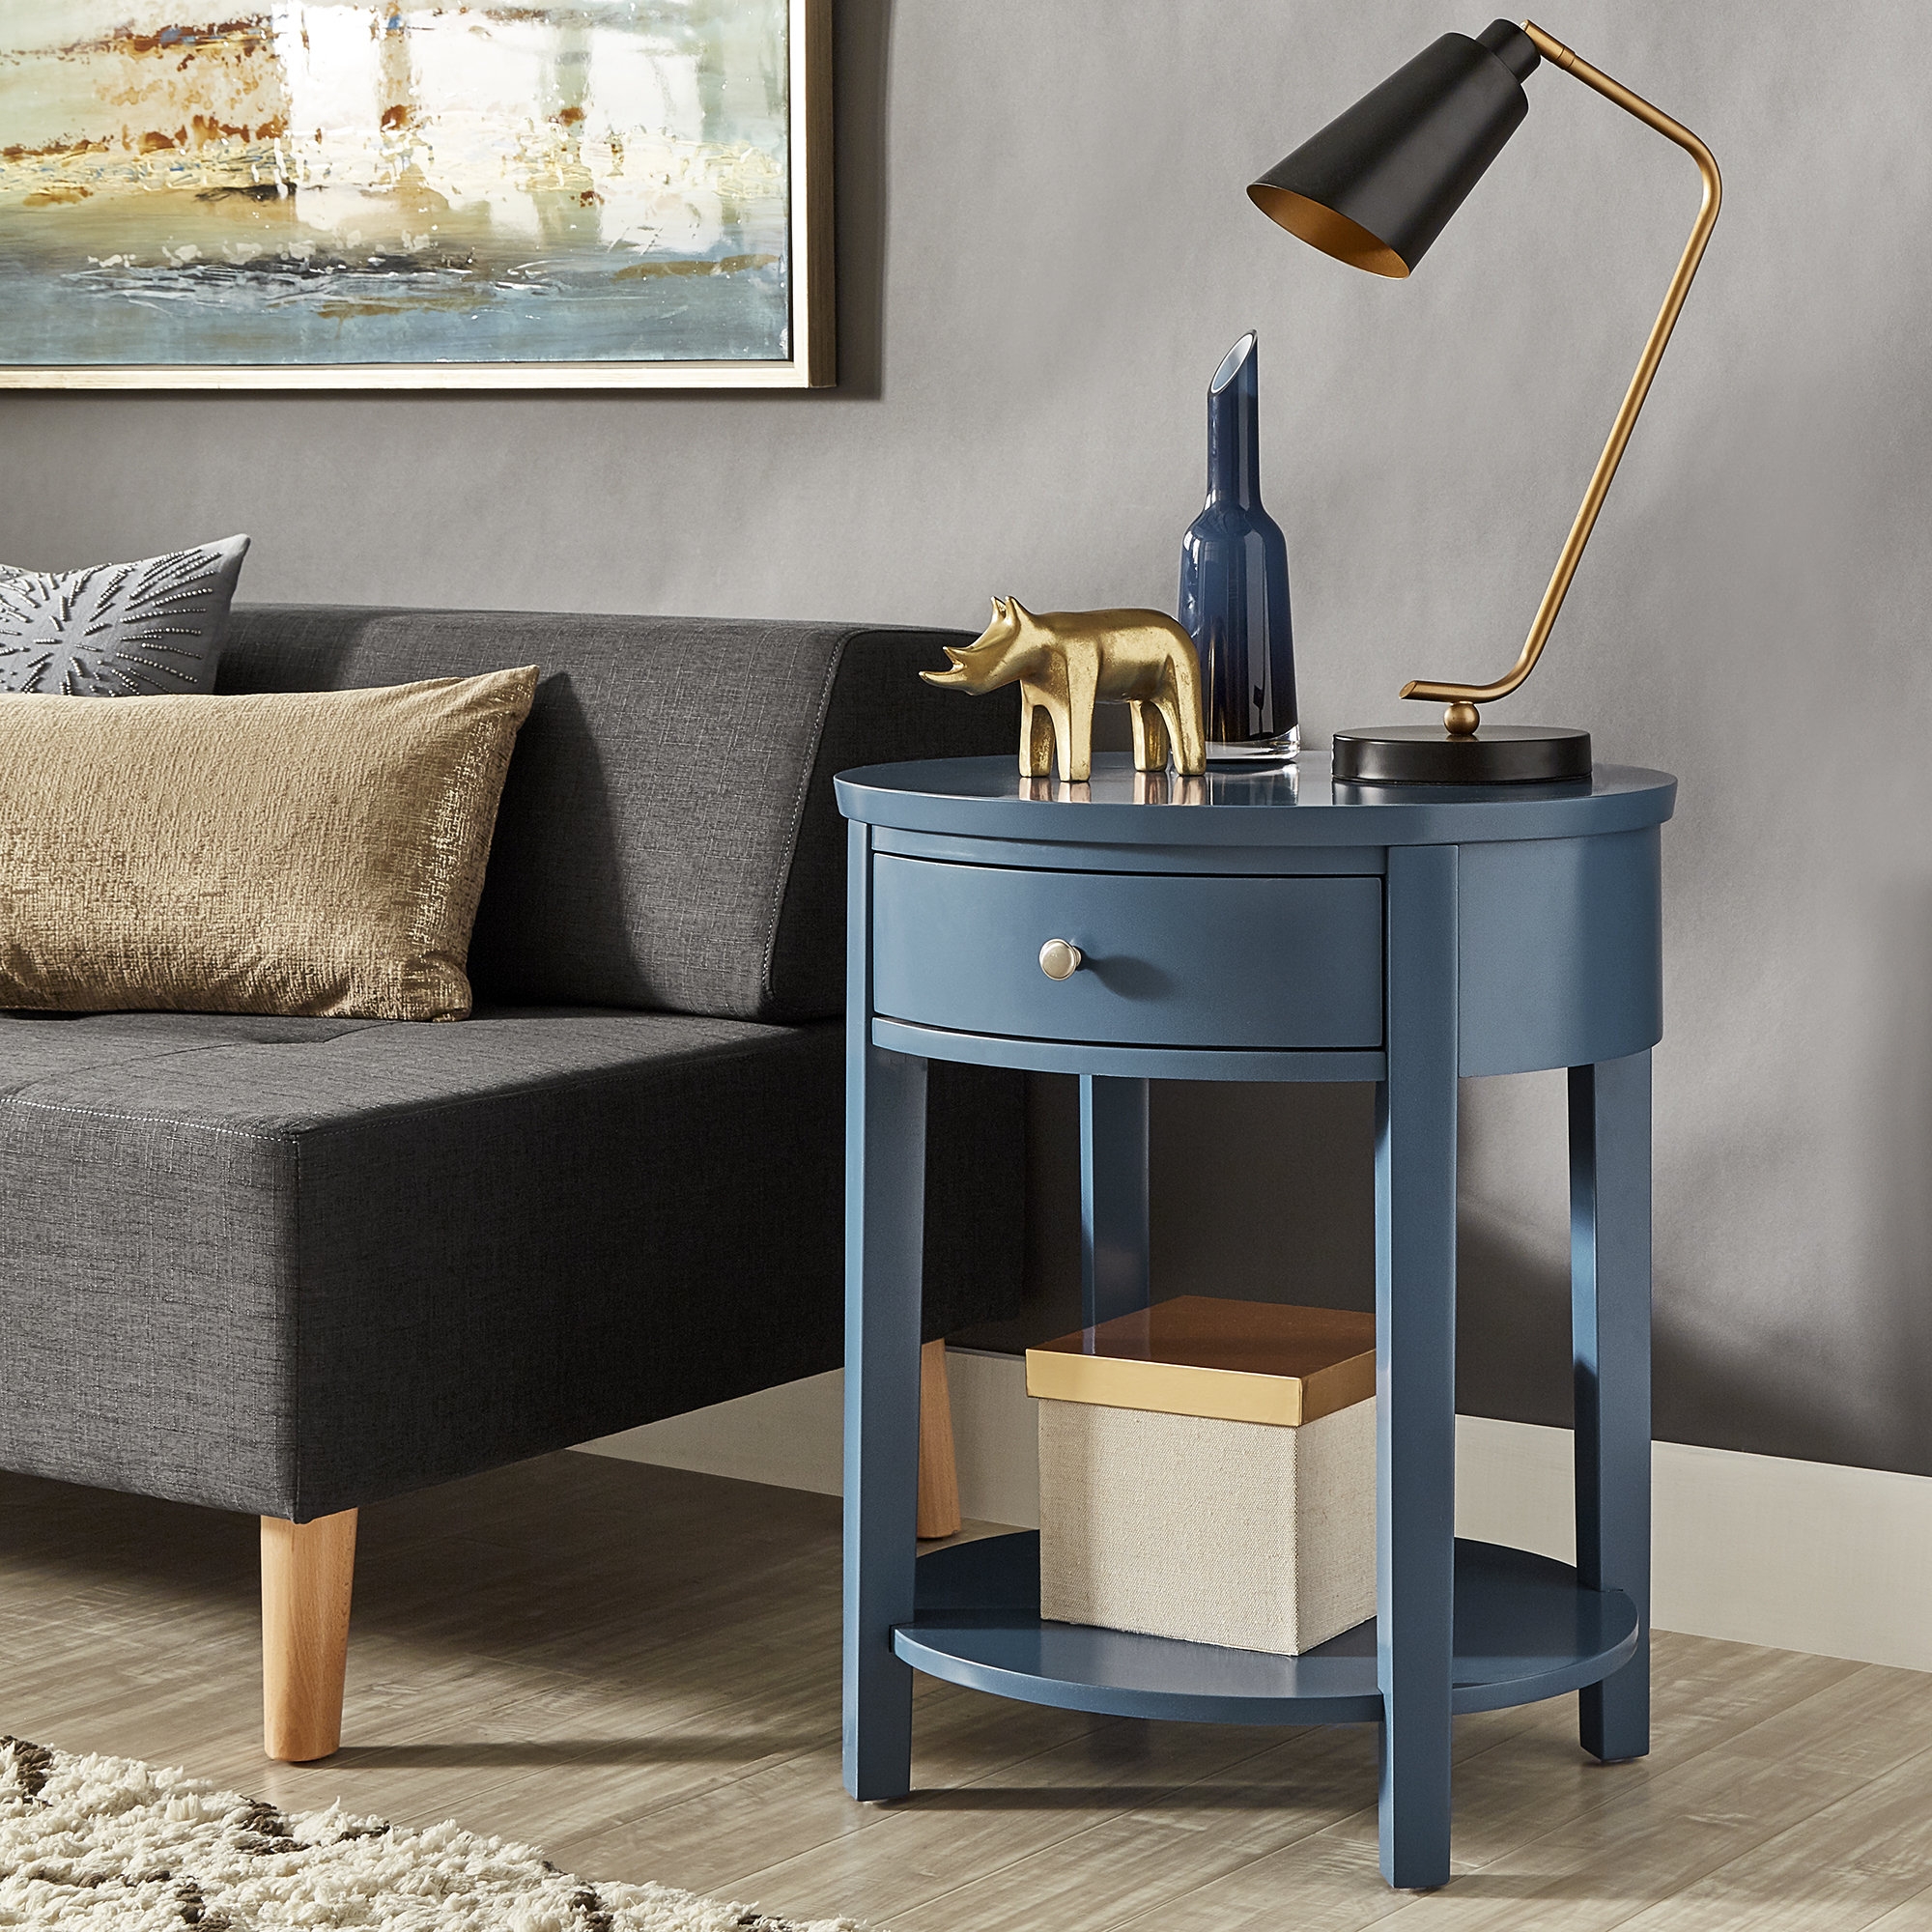 Canterbury End Table with Storage - Image 6